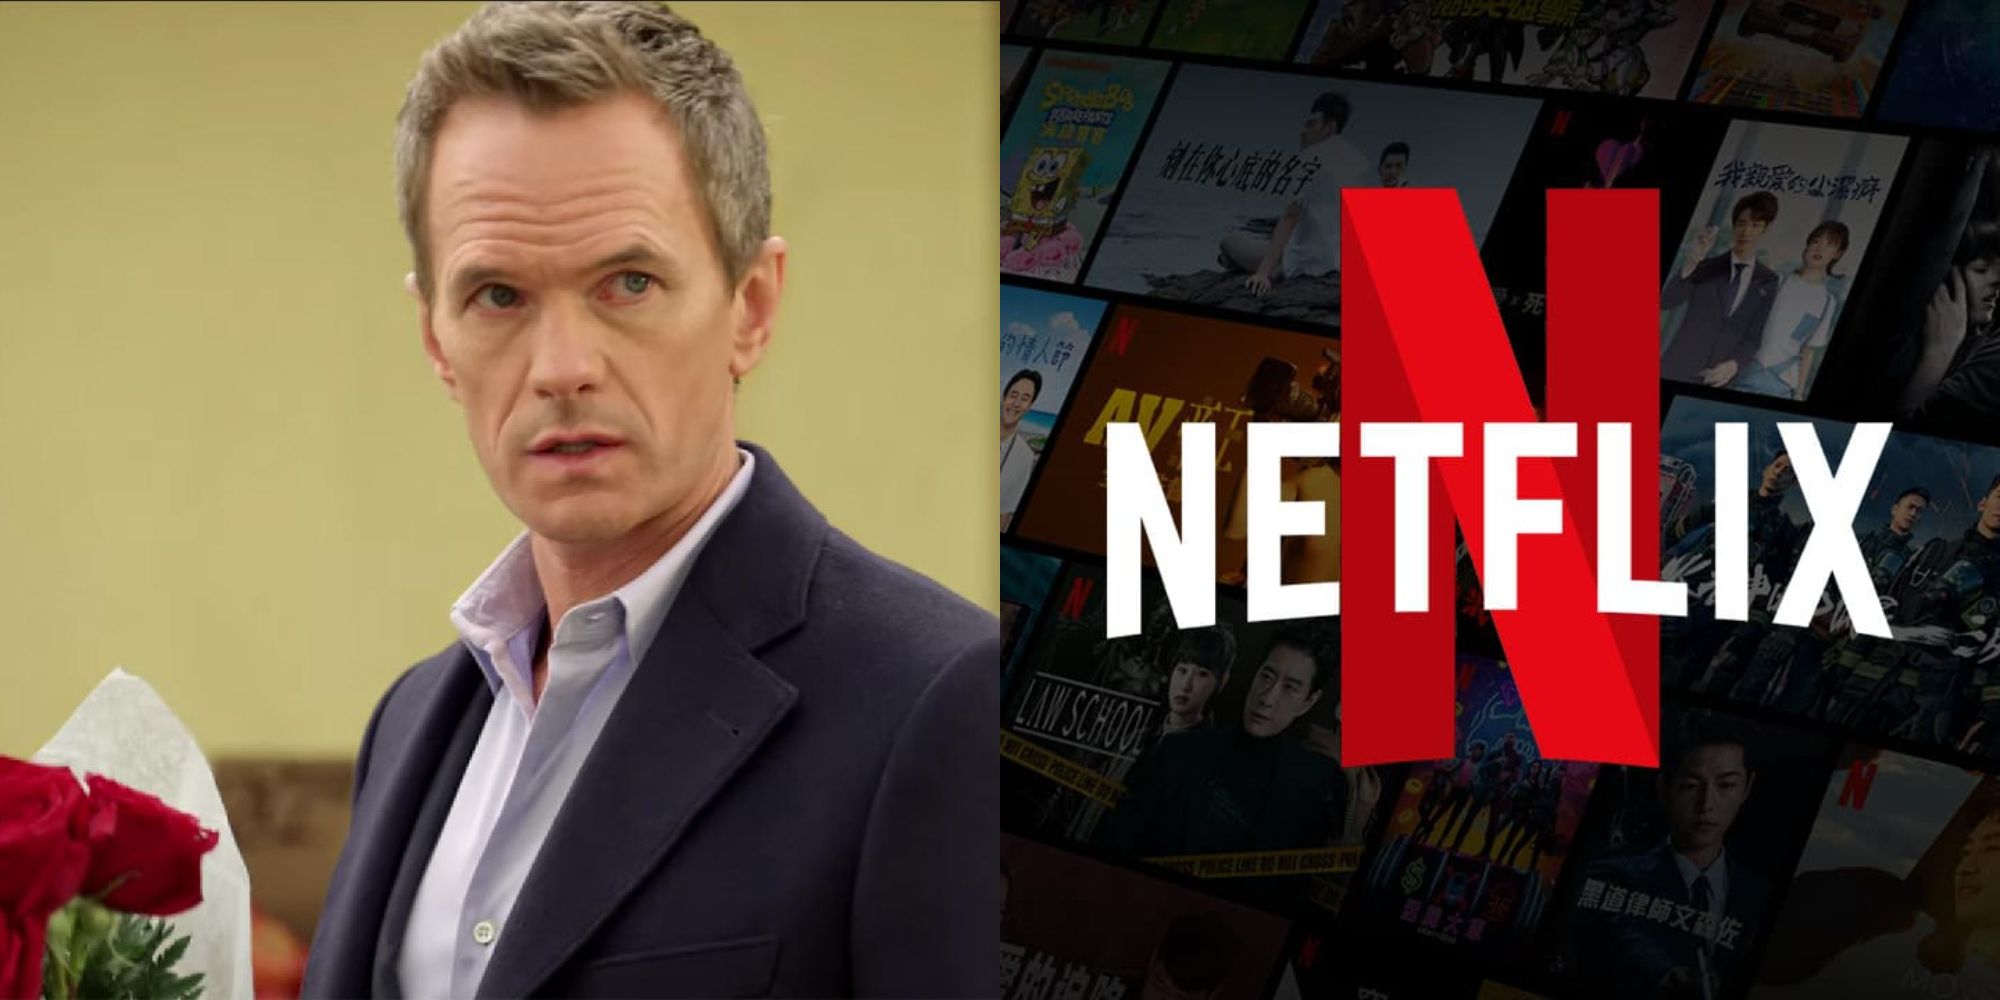 A split image of Neil Patrick Harris in Netflix's Uncoupled and the Netflix logo